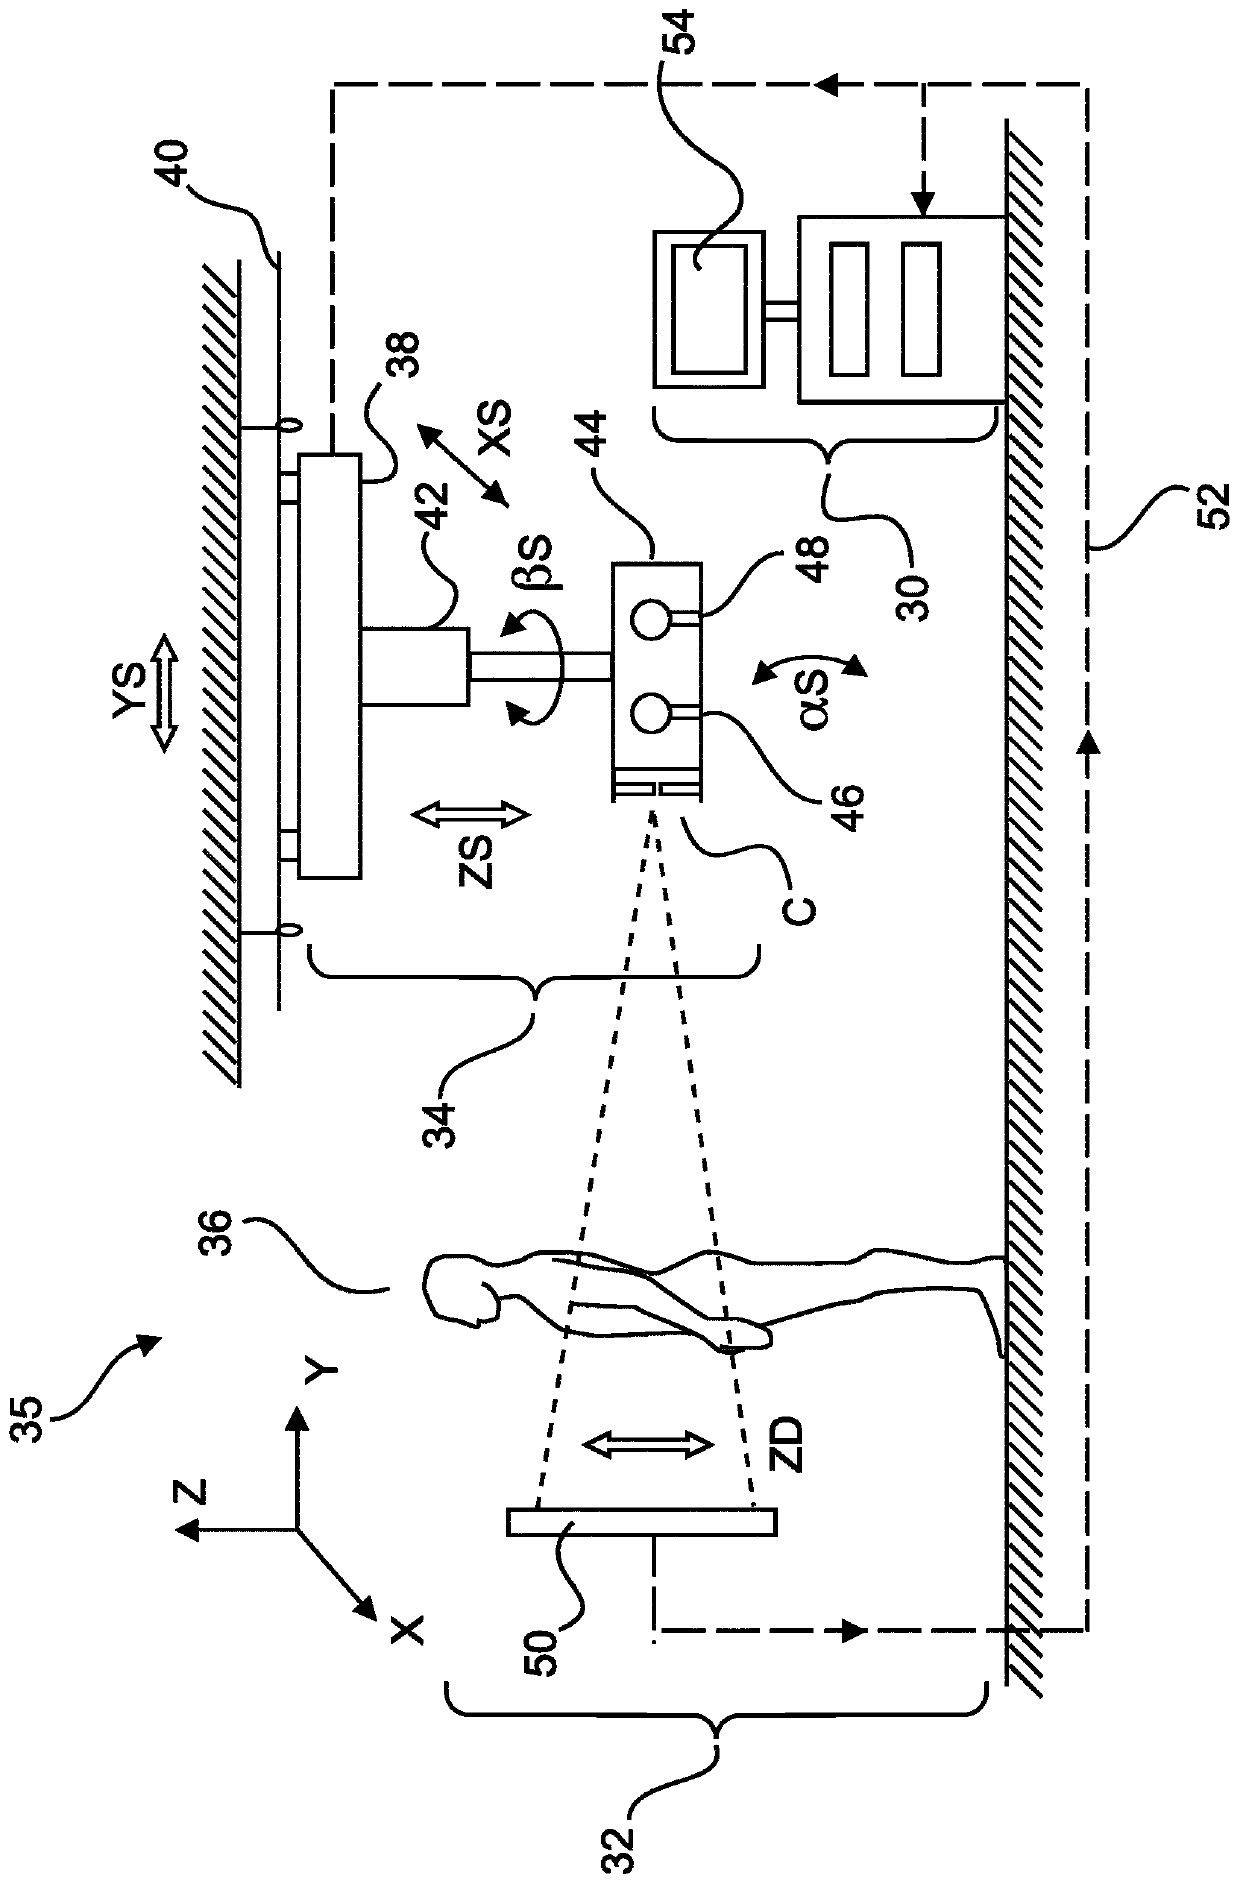 X-ray apparatus having a composite field of view